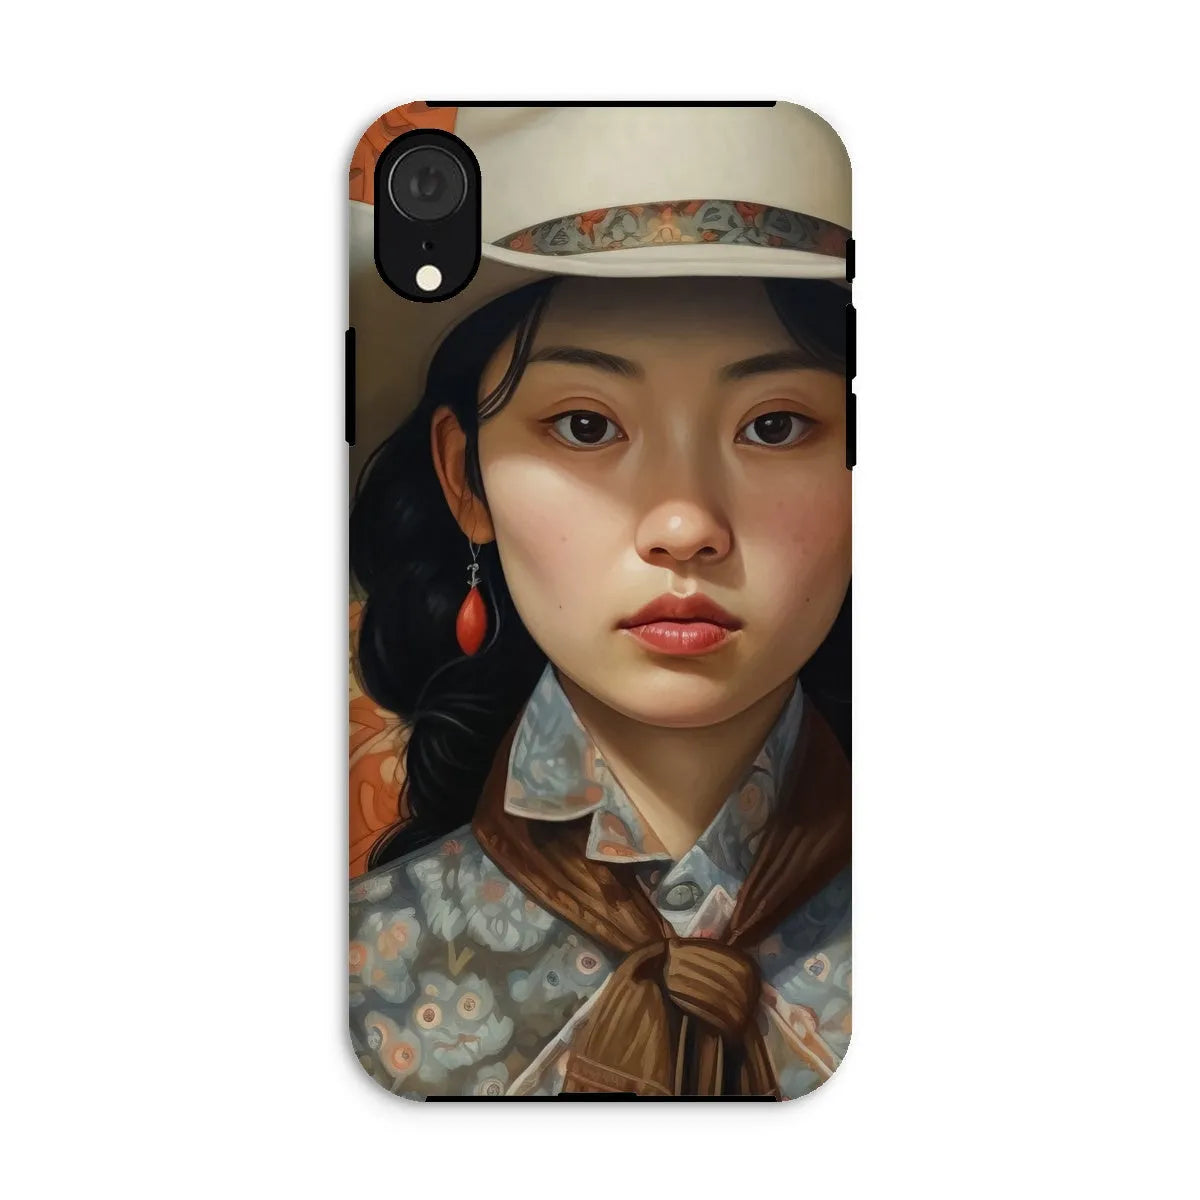 Zhi The Lesbian Cowgirl - Sapphic Art Phone Case - Iphone Xr / Matte - Mobile Phone Cases - Aesthetic Art